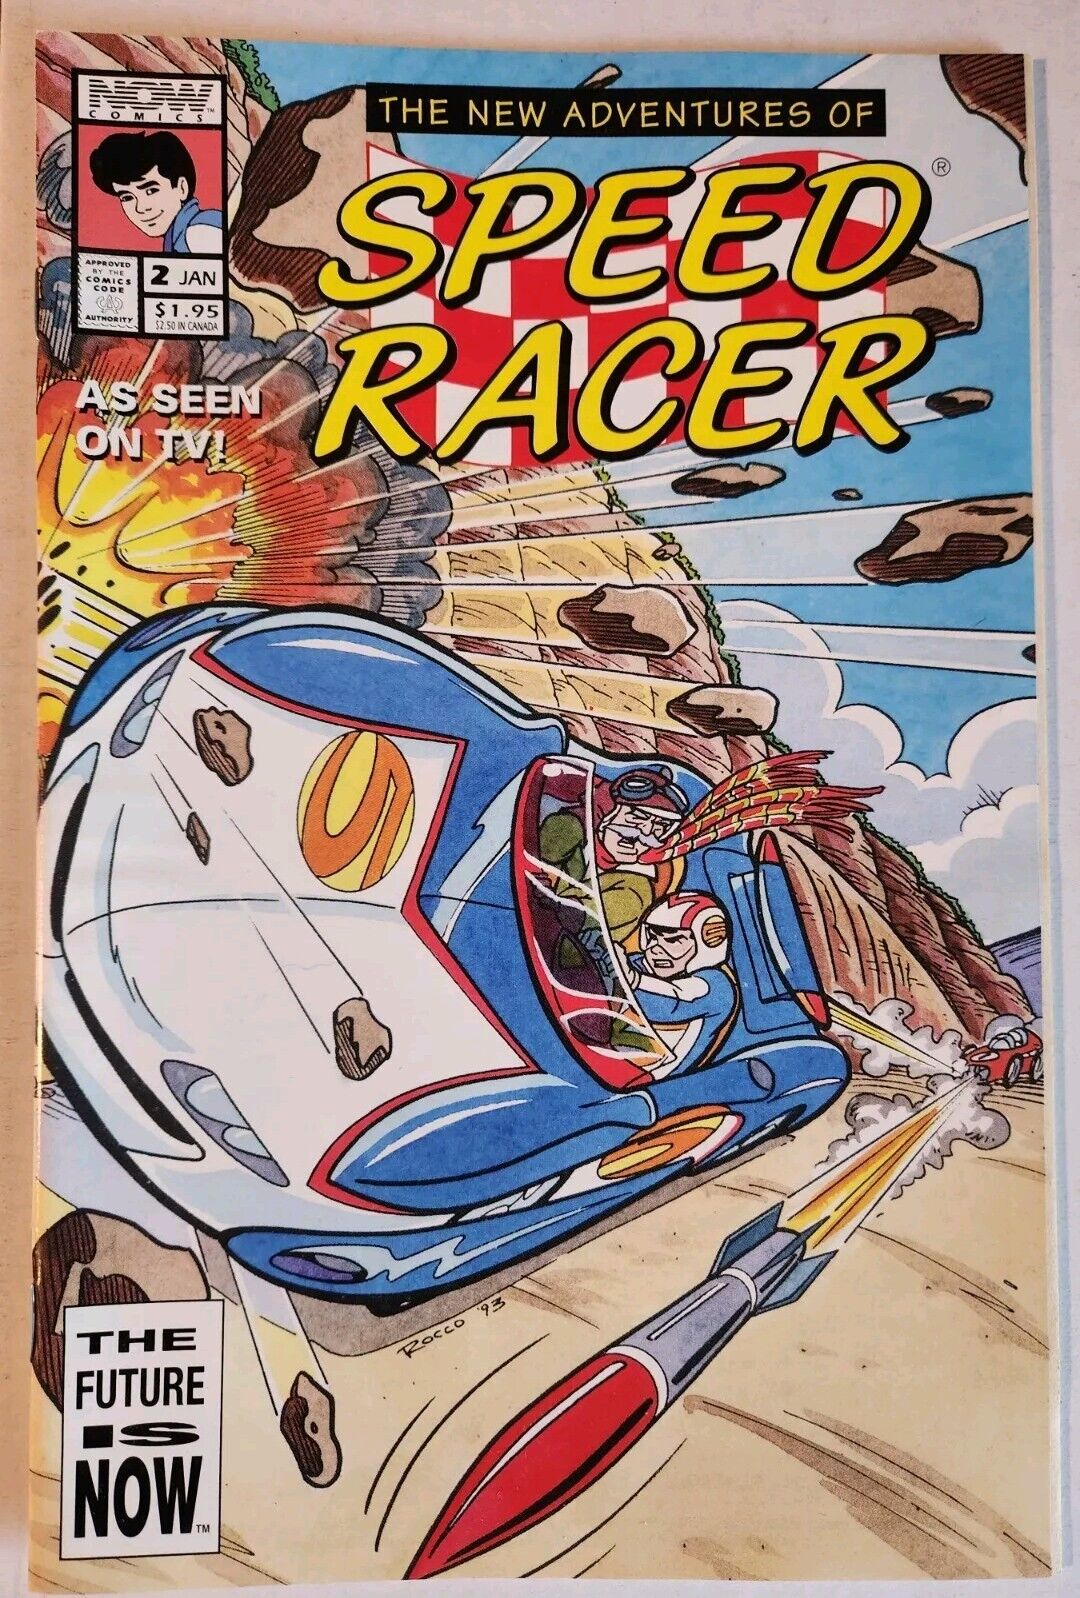 The New Adventures of Speed Racer #2 Now Comics (1994) VF+ Comic Book